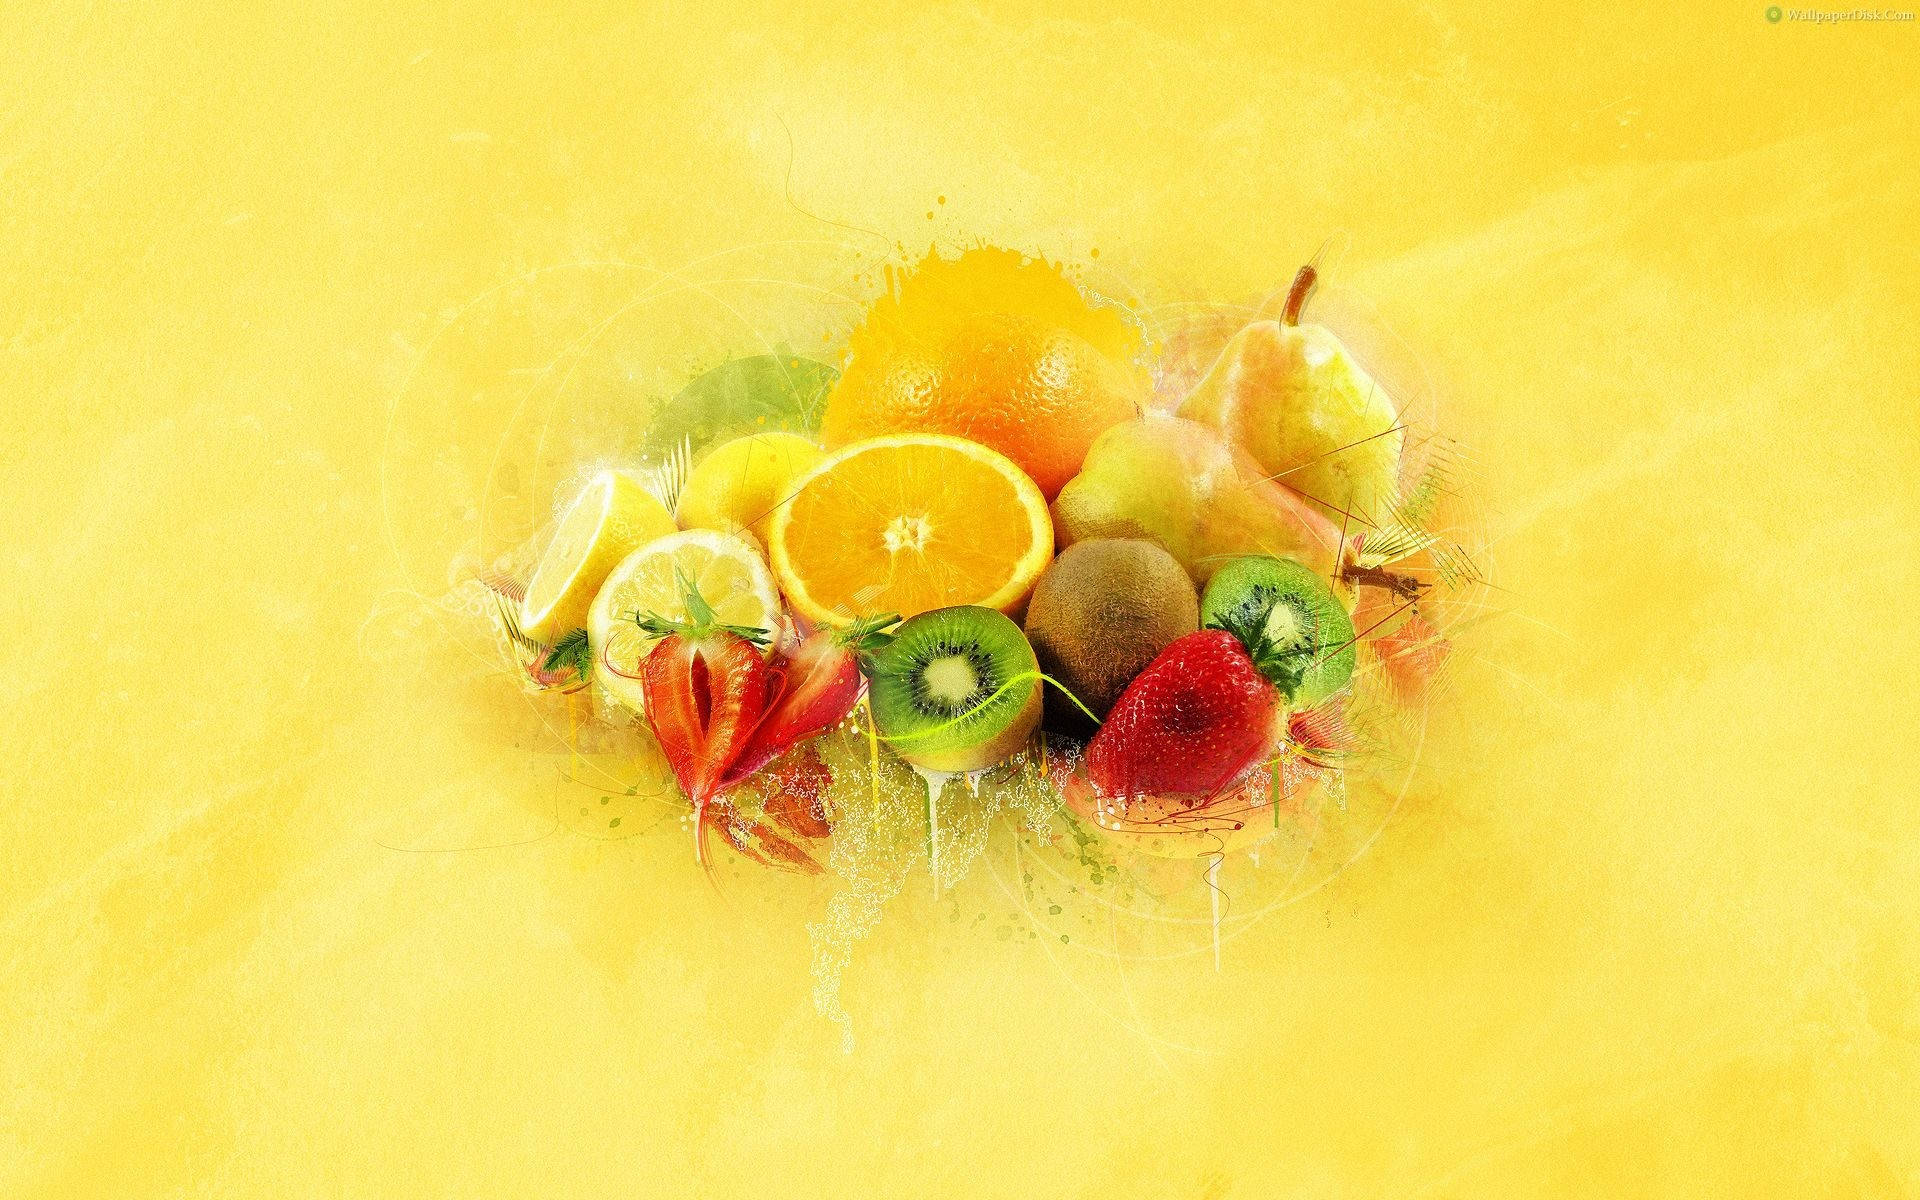 Cut Up Fruits In Yellow Background Wallpaper